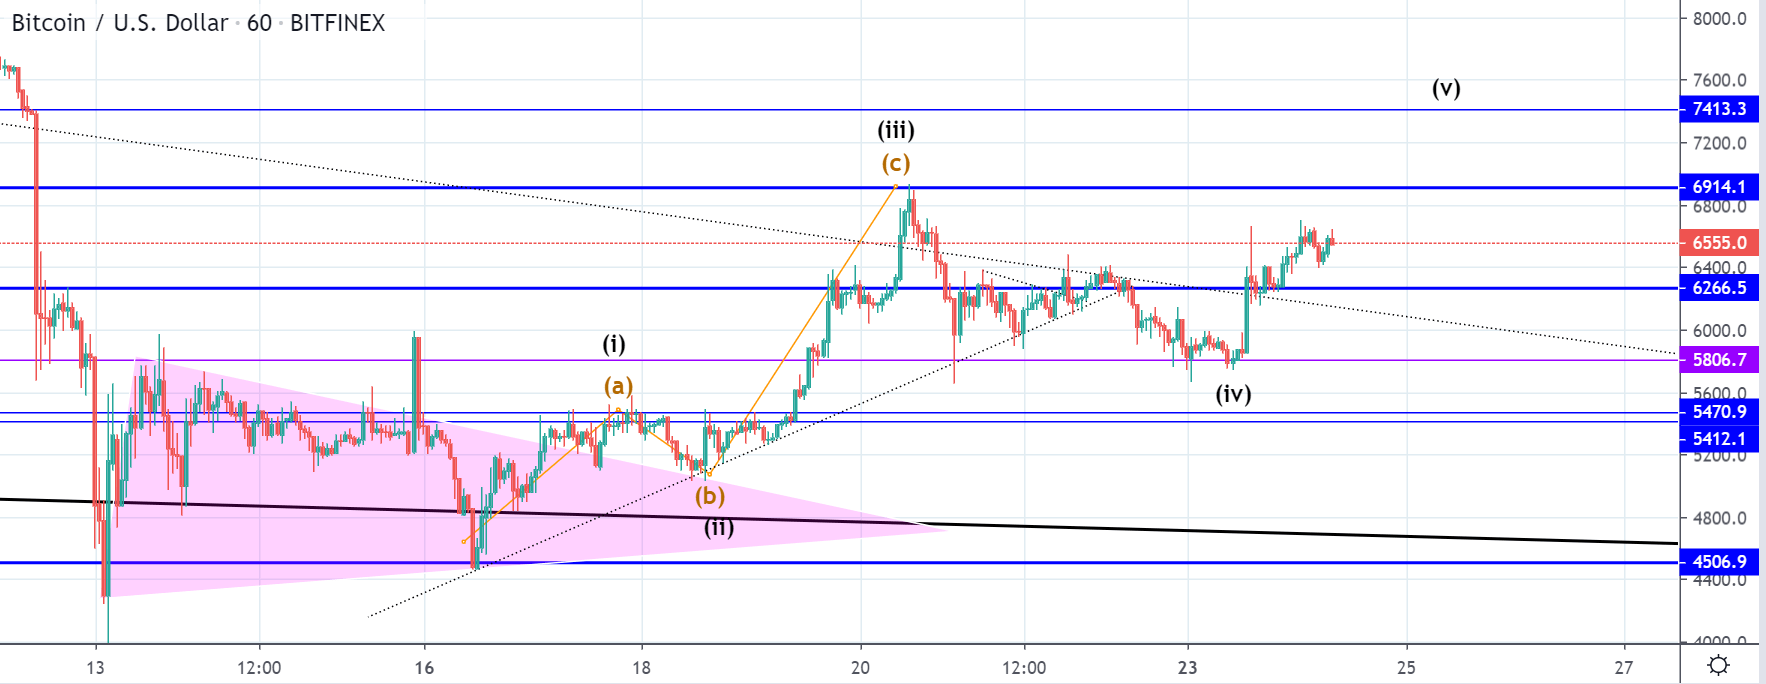 BTC and XRP - Bullish momentum could indicate longer-term recovery